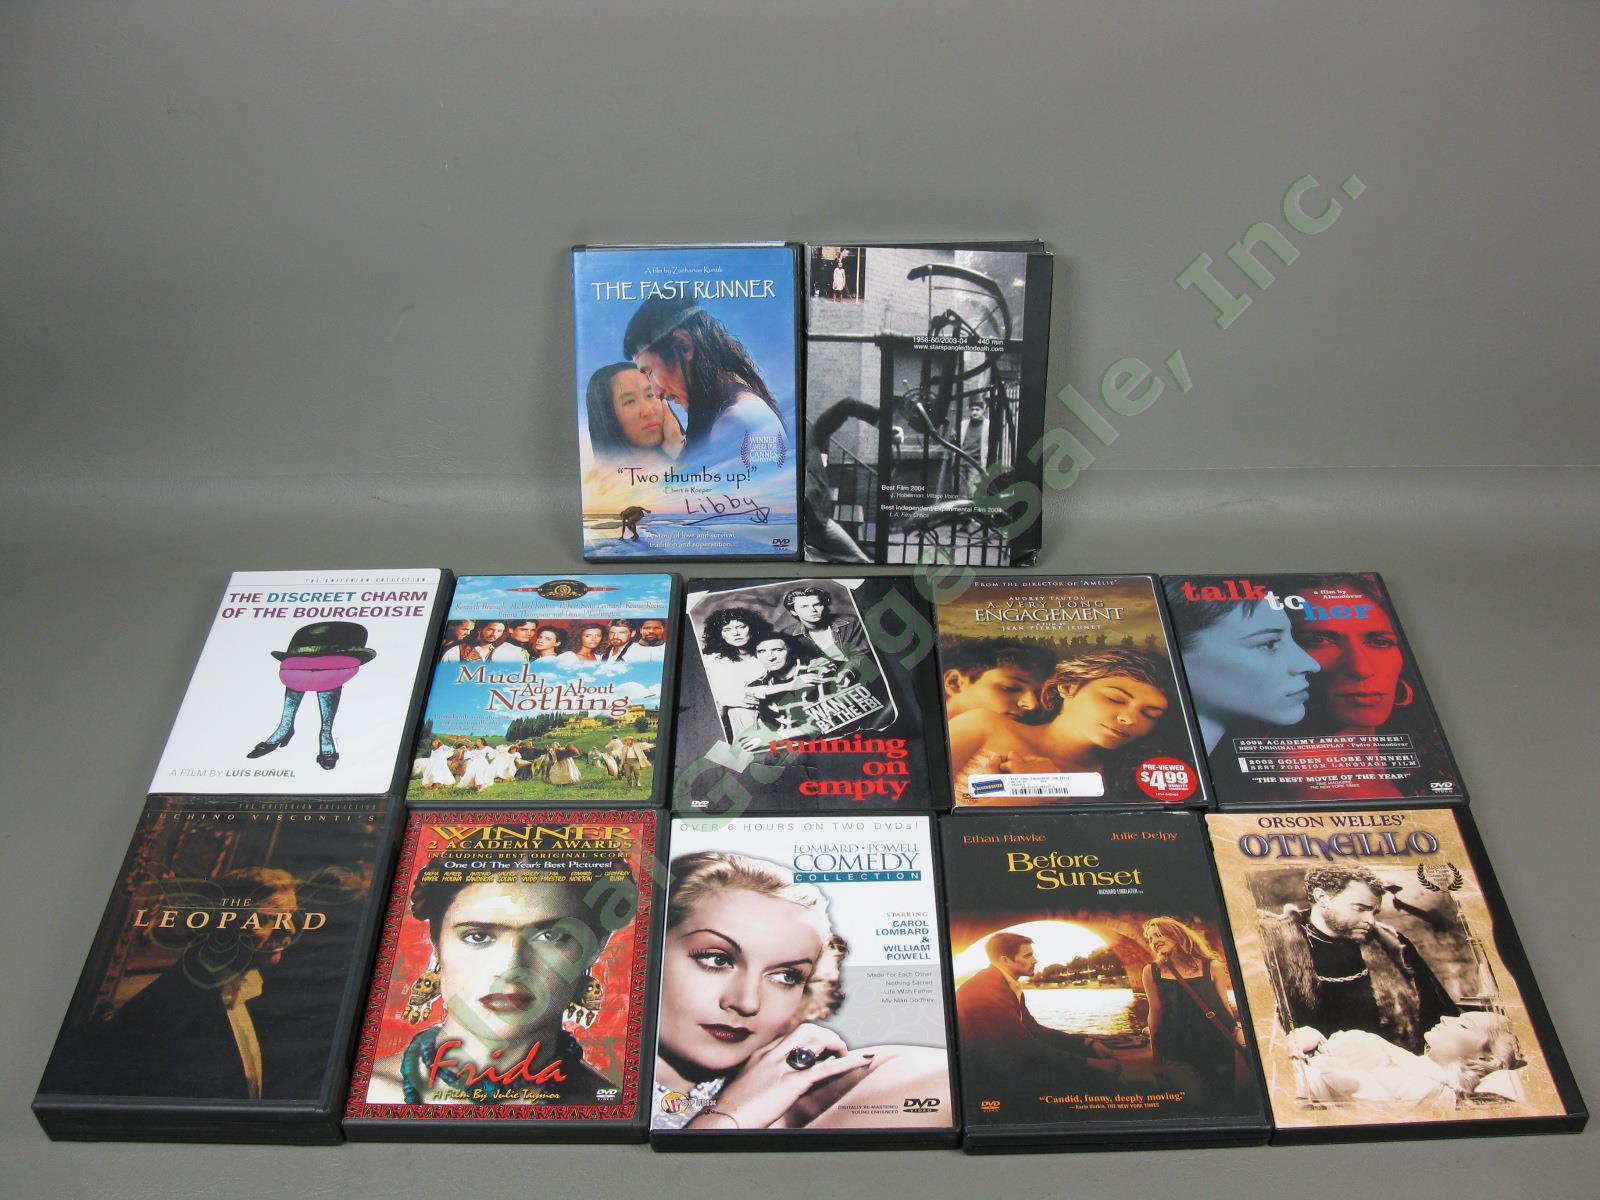 Huge DVD Lot Comedy Drama Suspense Sci Fi Thriller Western Criterion Collection 3